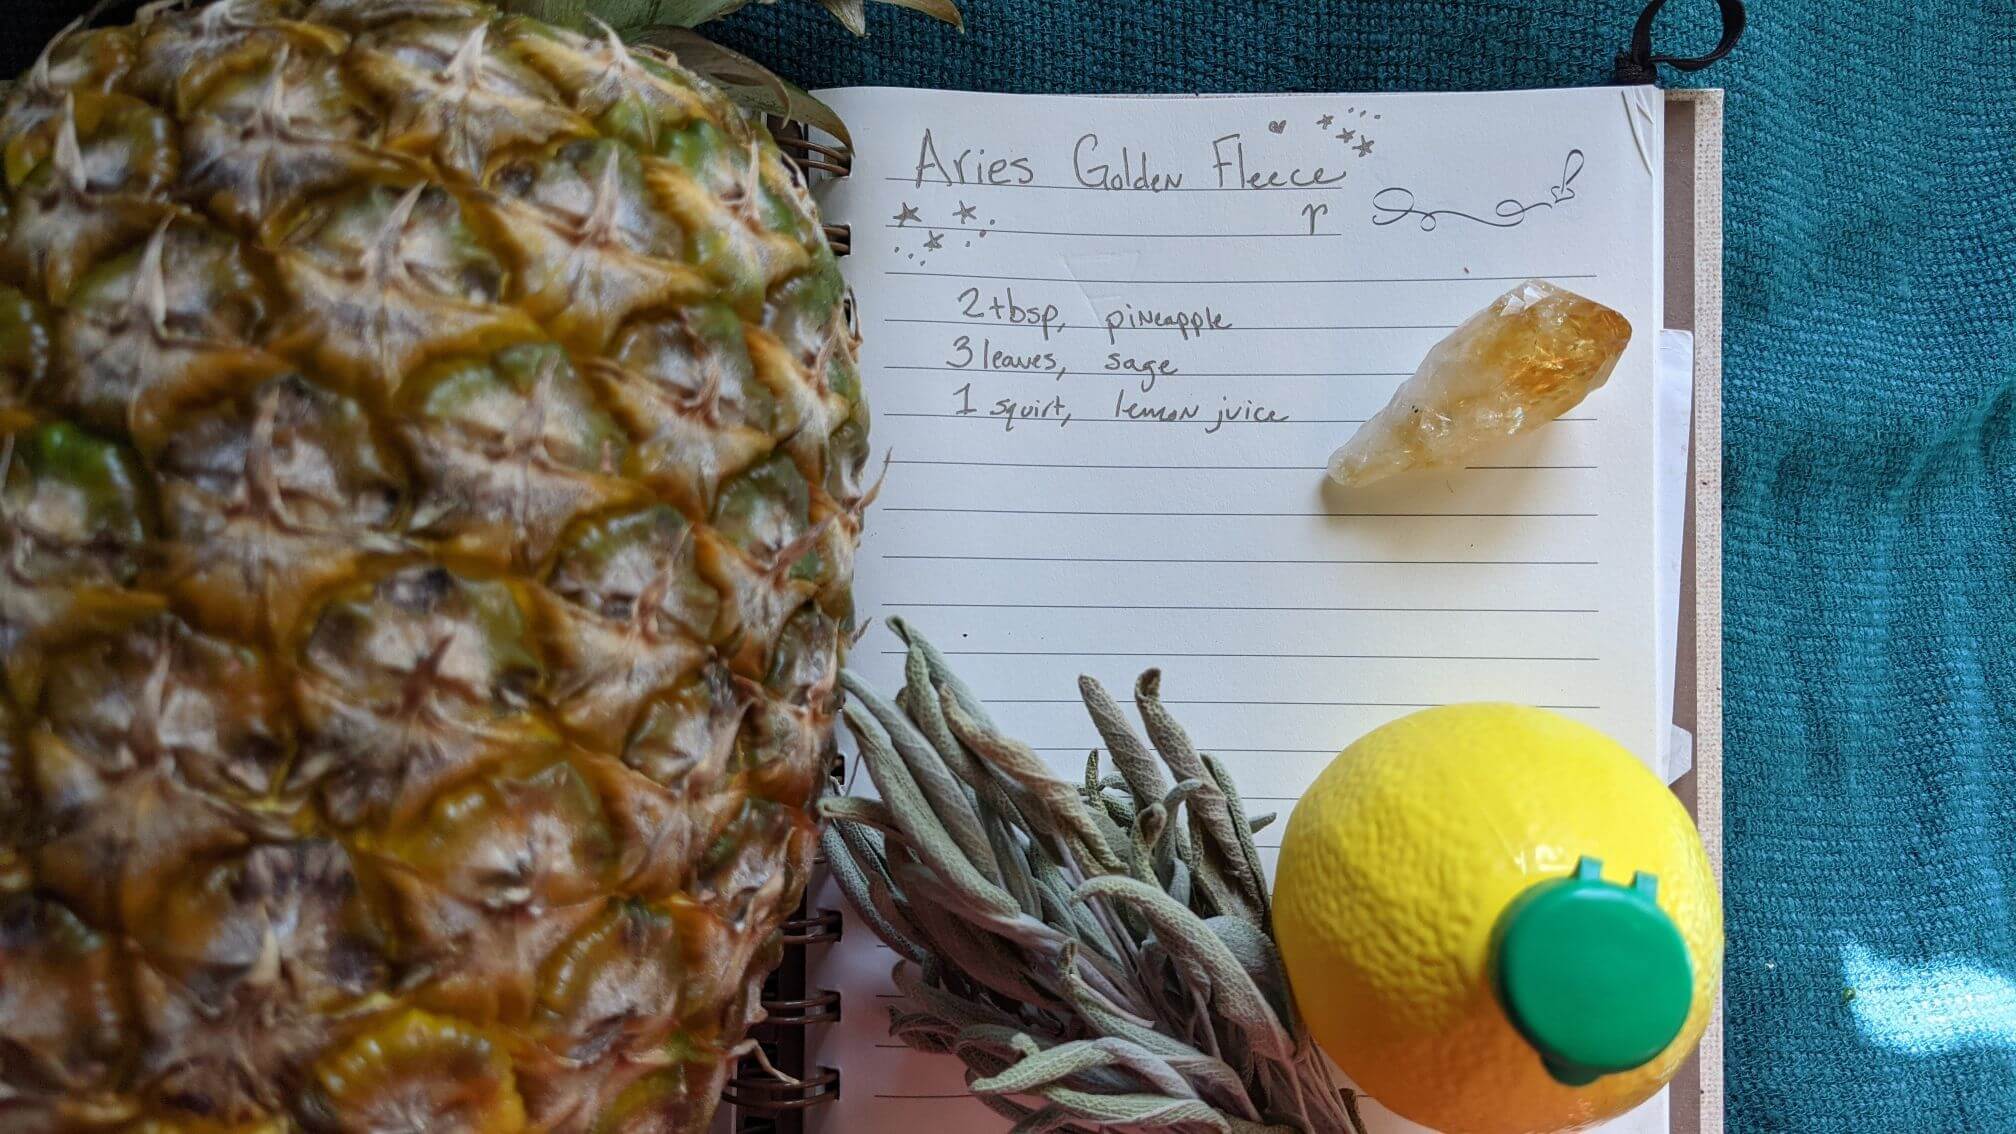 A fresh pineapple lays over a handwritten recipe. Dried sage, lemon juice, and a polished citrine quartz are featured.